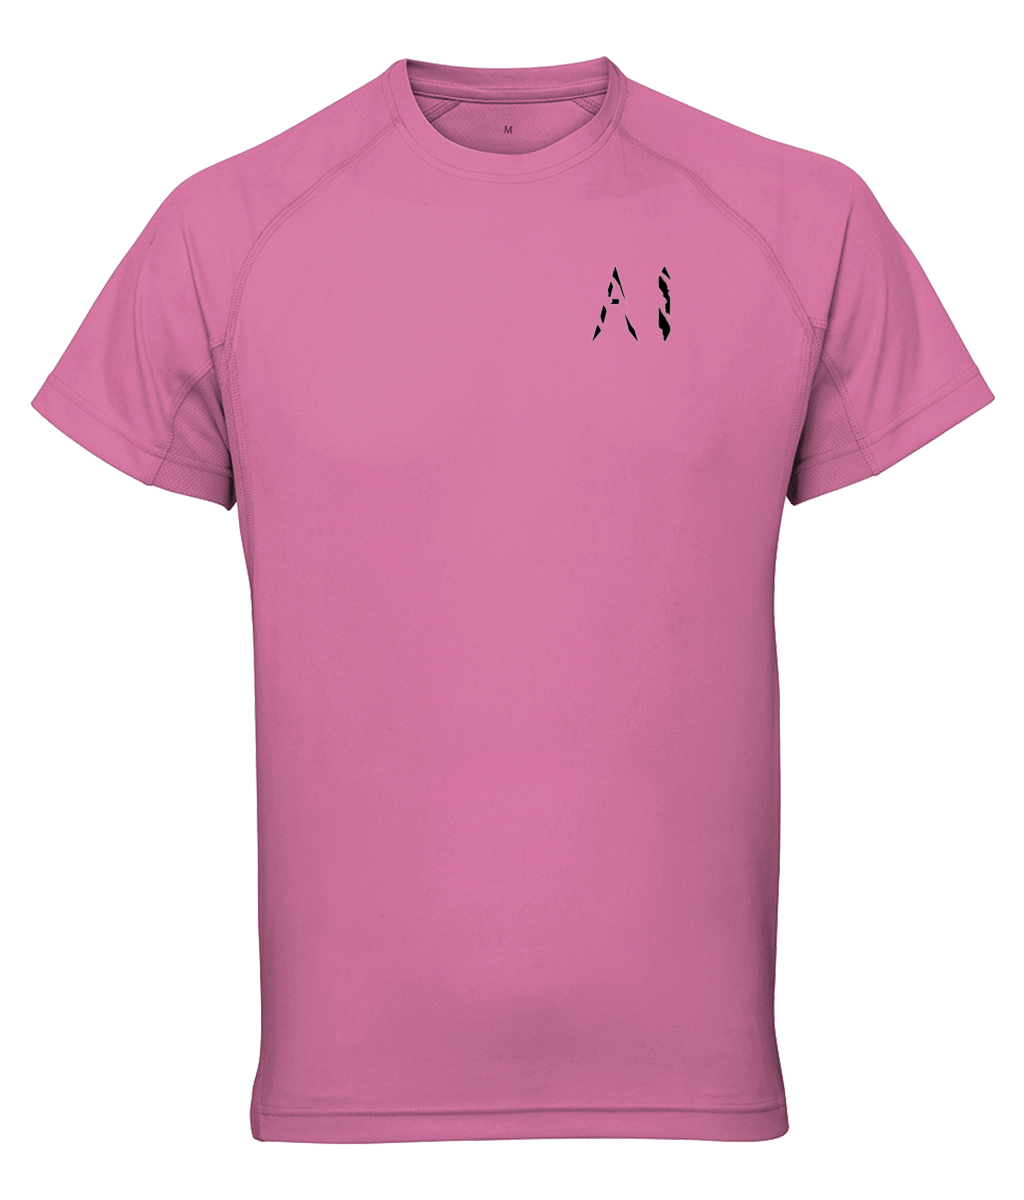 Womens light pink Athletic Performance Top with black AI logo on left breast